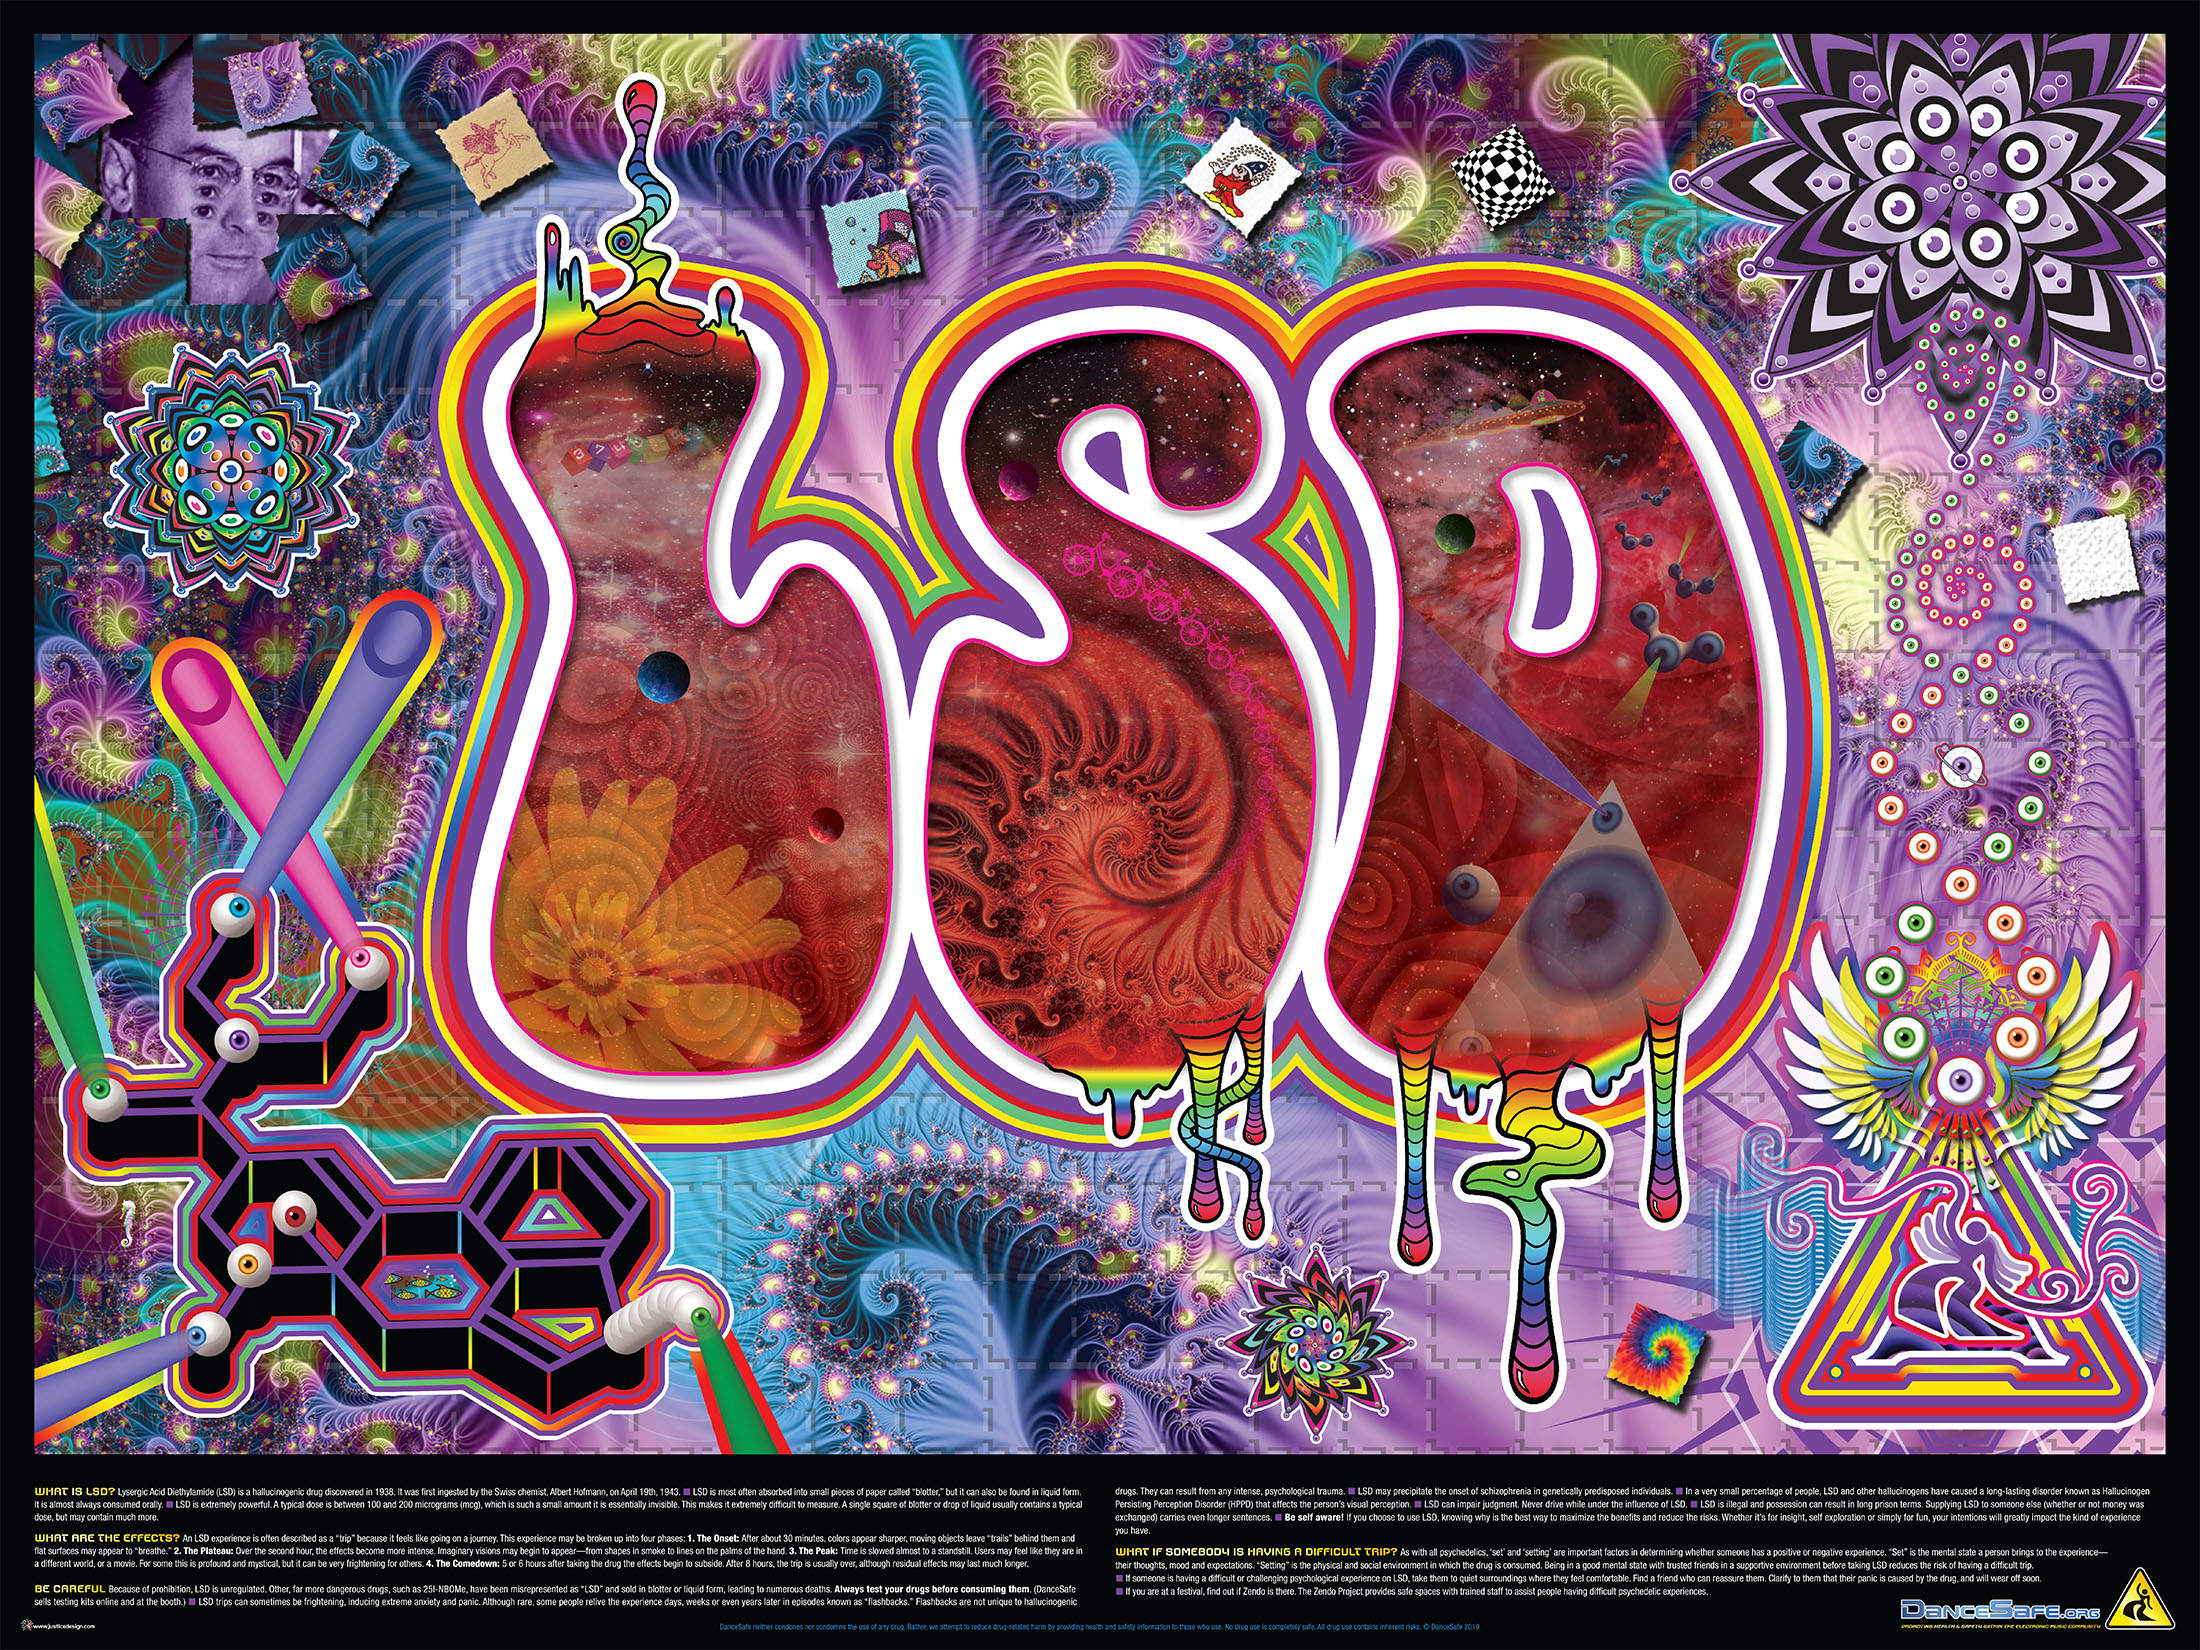 The DanceSafe LSD poster, with the graphic from the card on the top and LSD health and safety info on the bottom.